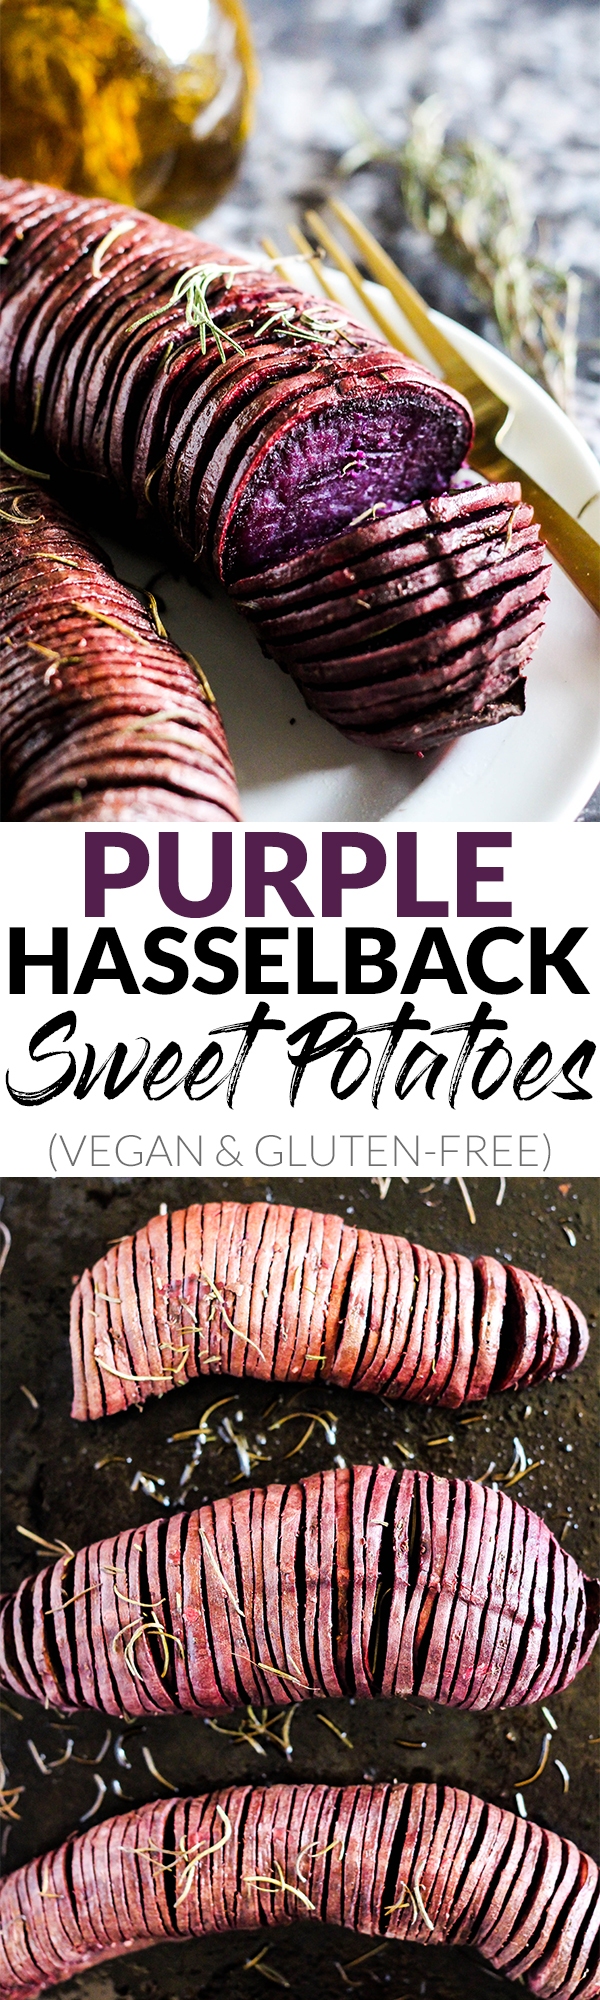 Need an exciting way to cook potatoes for dinner? These Purple Hasselback Sweet Potatoes are your new favorite side dish. Plus an infused olive oil recipe! (vegan & gluten-free)